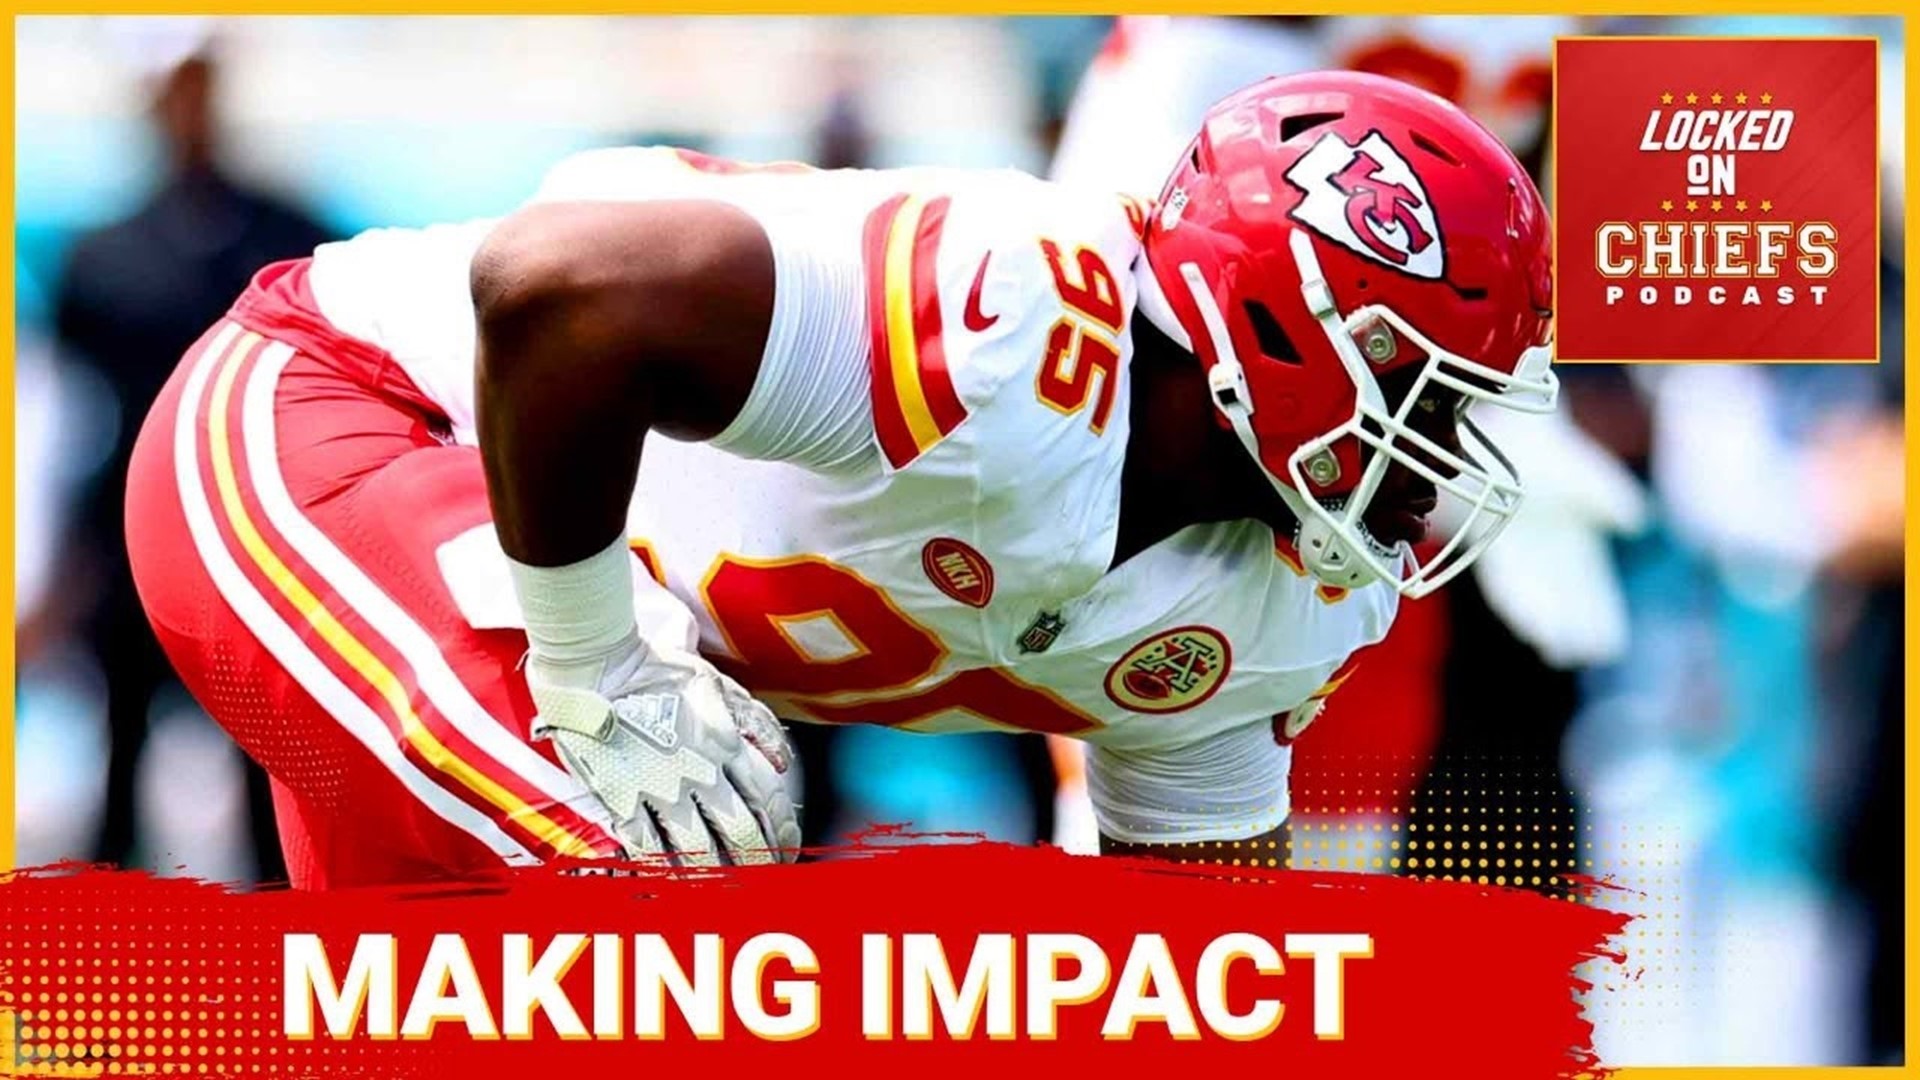 Kansas City Chiefs vs the Jacksonville Jaguars!  Chris Jones and Travis Kelce make an impact and the Chiefs move to 1-1 on the season!